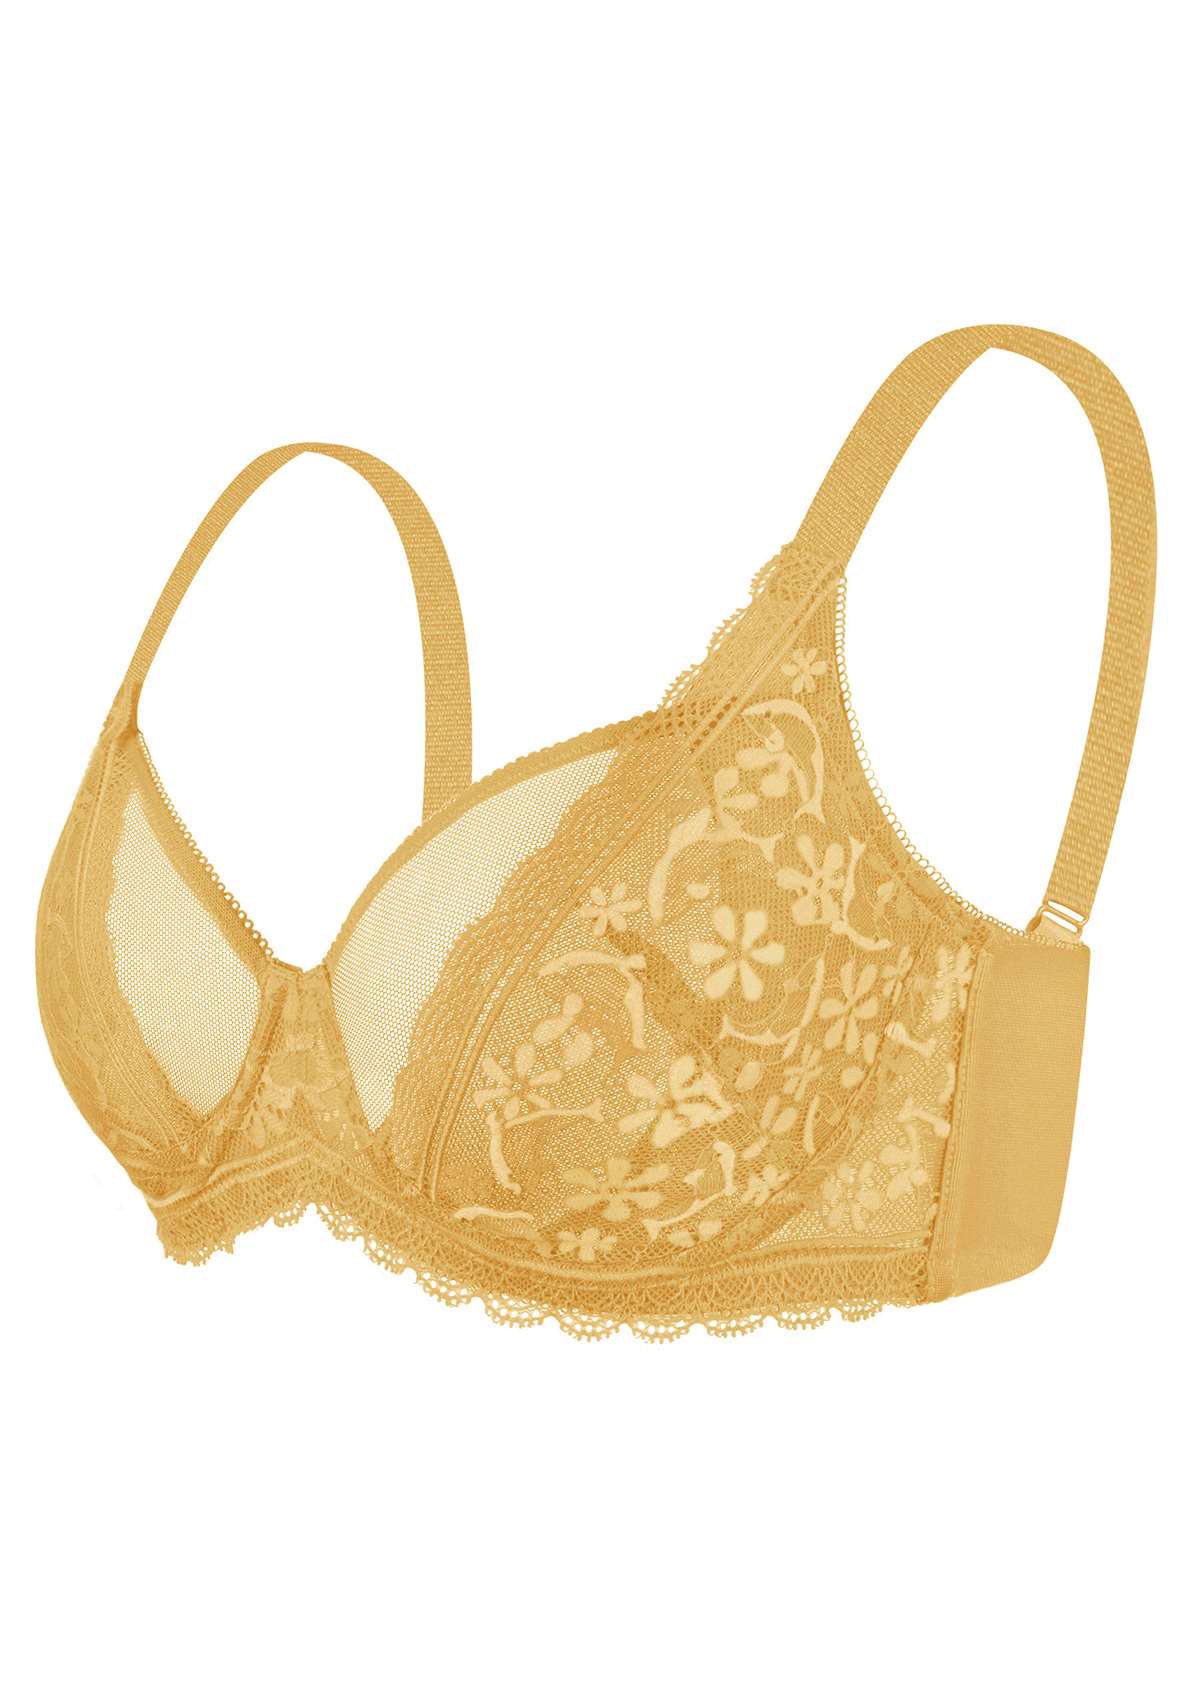 HSIA Anemone Lace Unlined Bra: Supportive, Lightweight Bra - Ginger / 36 / DDD/F